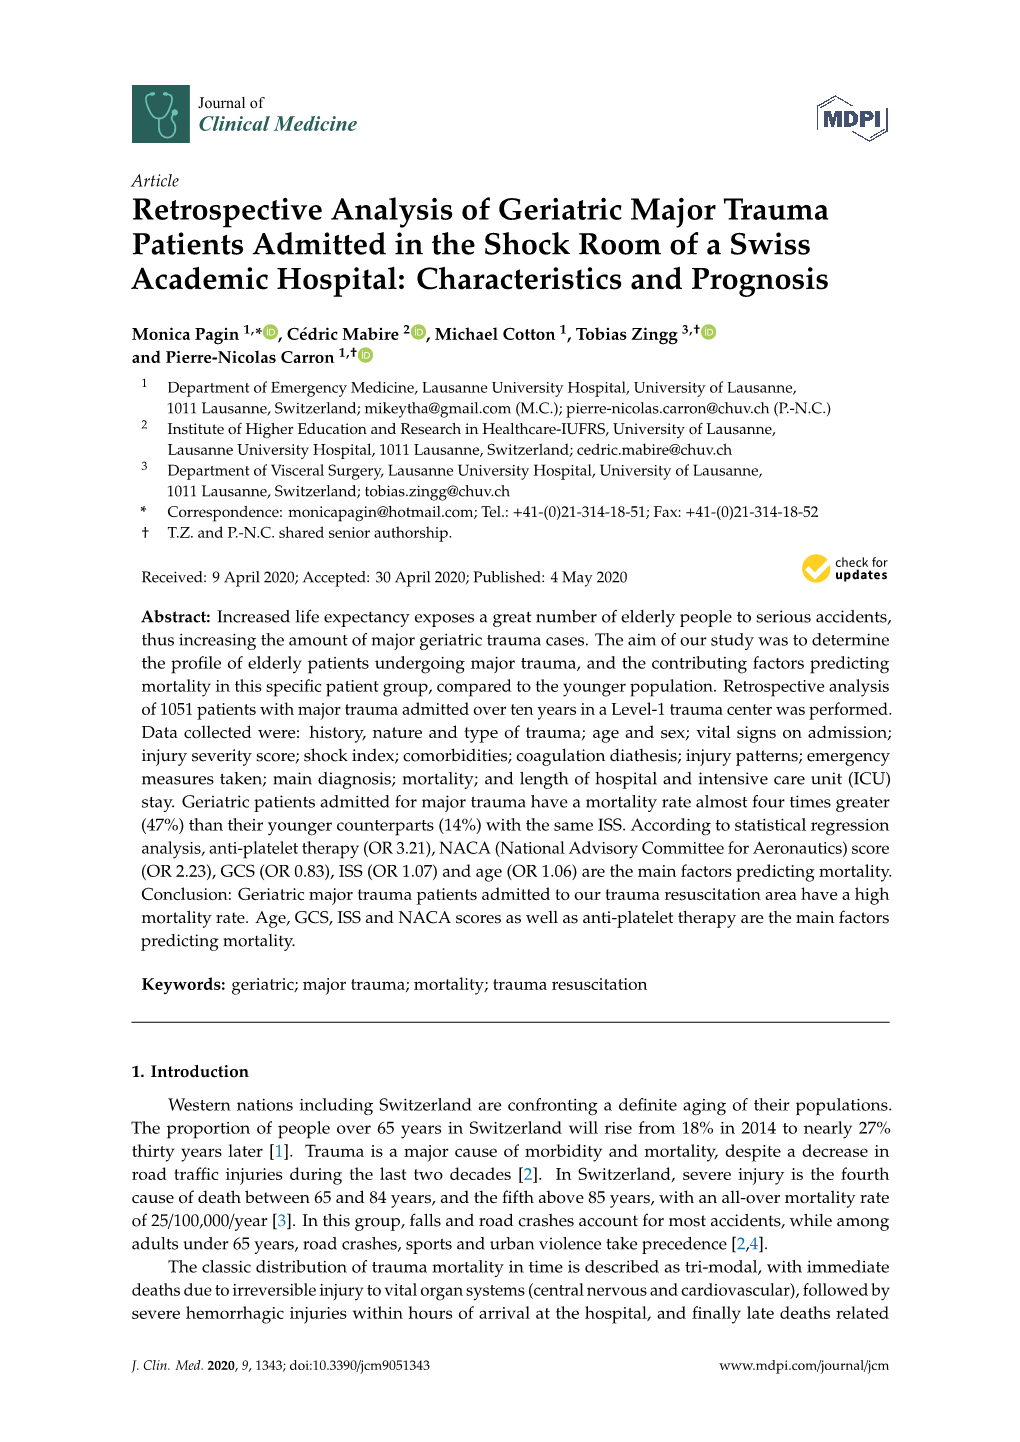 Retrospective Analysis of Geriatric Major Trauma Patients Admitted in the Shock Room of a Swiss Academic Hospital: Characteristics and Prognosis